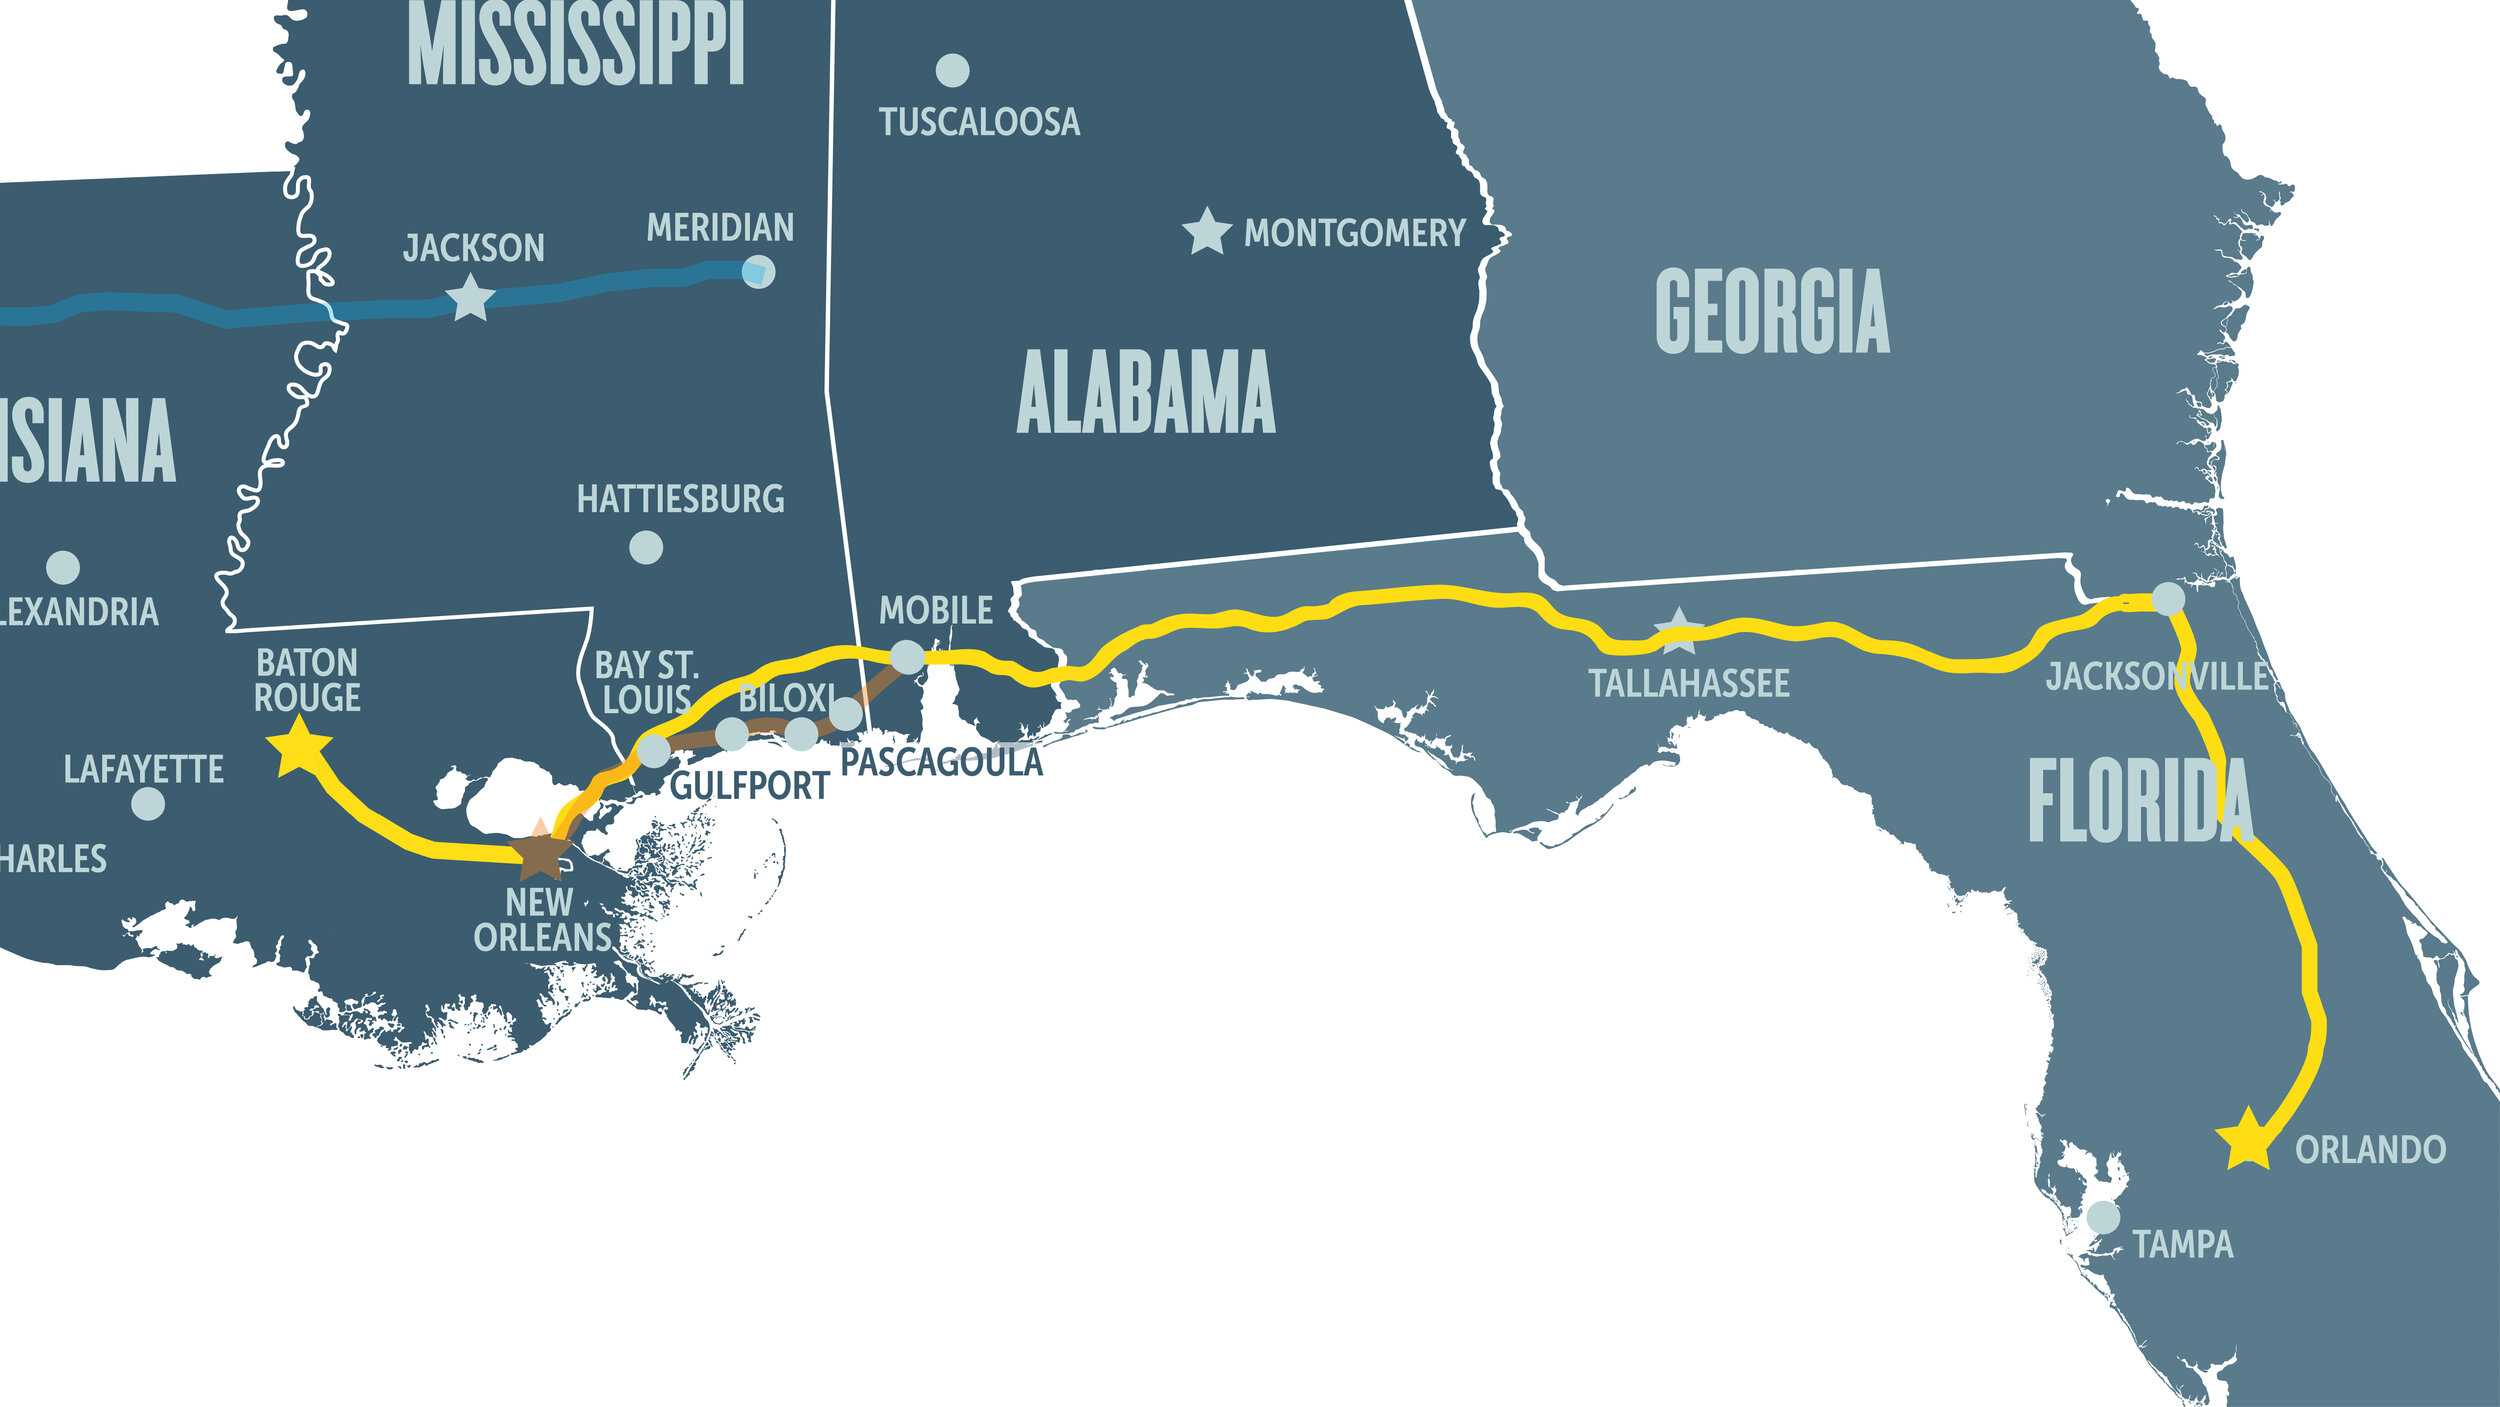 One historic project will help restore passenger rail service to the Gulf Coast for the first time in nearly two decades